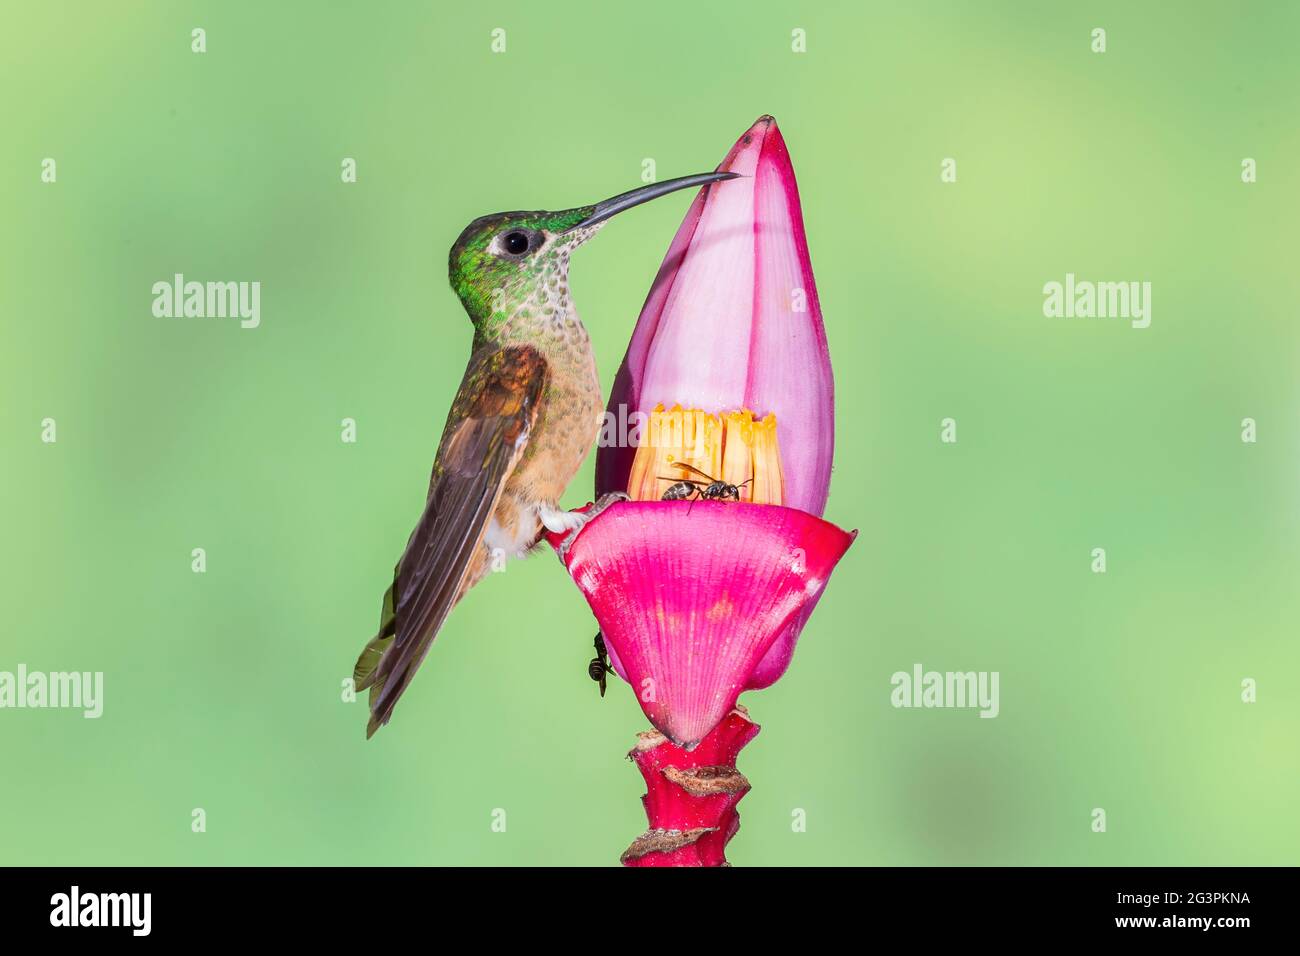 many-spotted hummingbird, Taphrospilus hypostictus, single adult feeding on nectar of tropical flower, Ecuador, South America Stock Photo